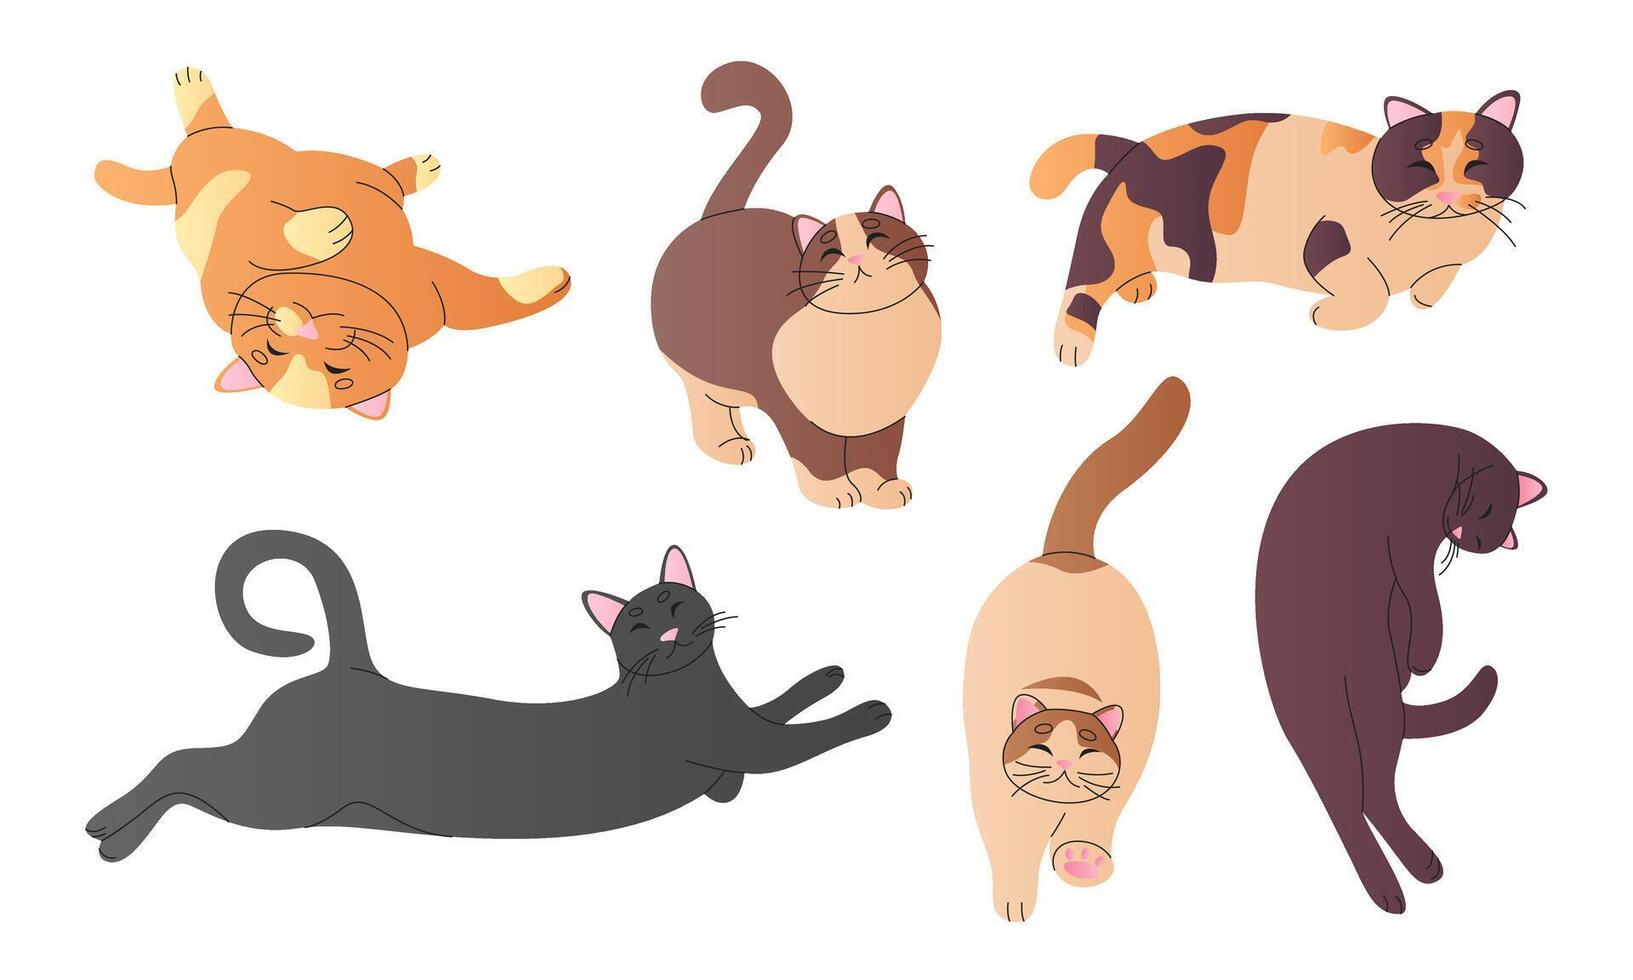 Set of cute kitten, funny cats relaxing, sleeping, playing.Happy international fluffy cat day characters in different poses.Adorable pet animals with amusing expressions, emotions.Flat line stickers vector